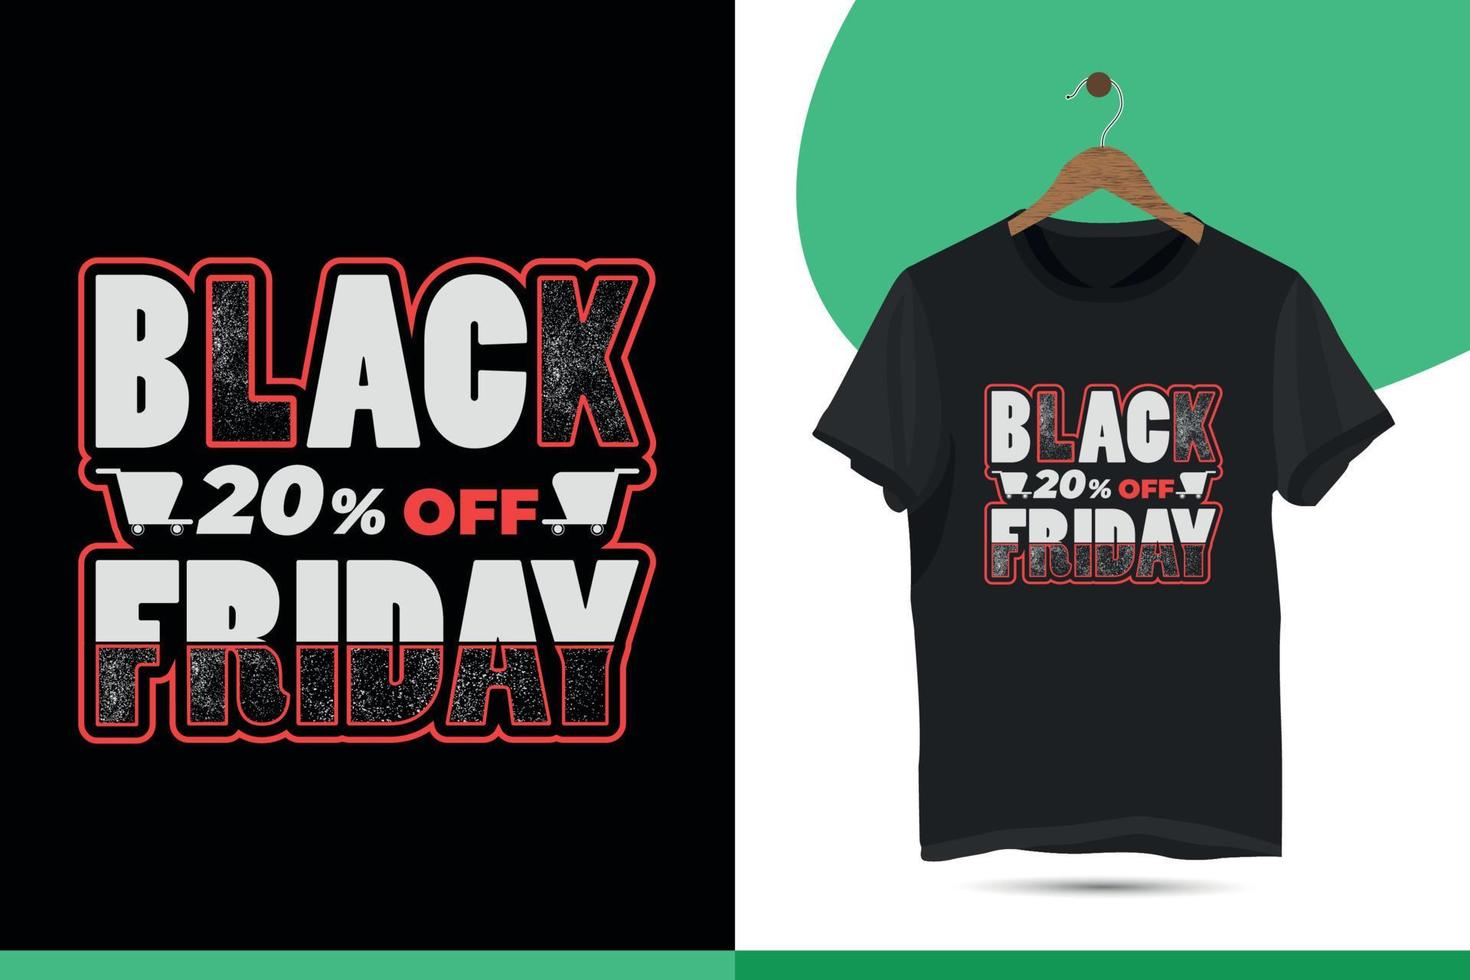 Black Friday Discount Vector Template Design for print on t-shirts, shirts, bags, caps, mugs, and sale badges.